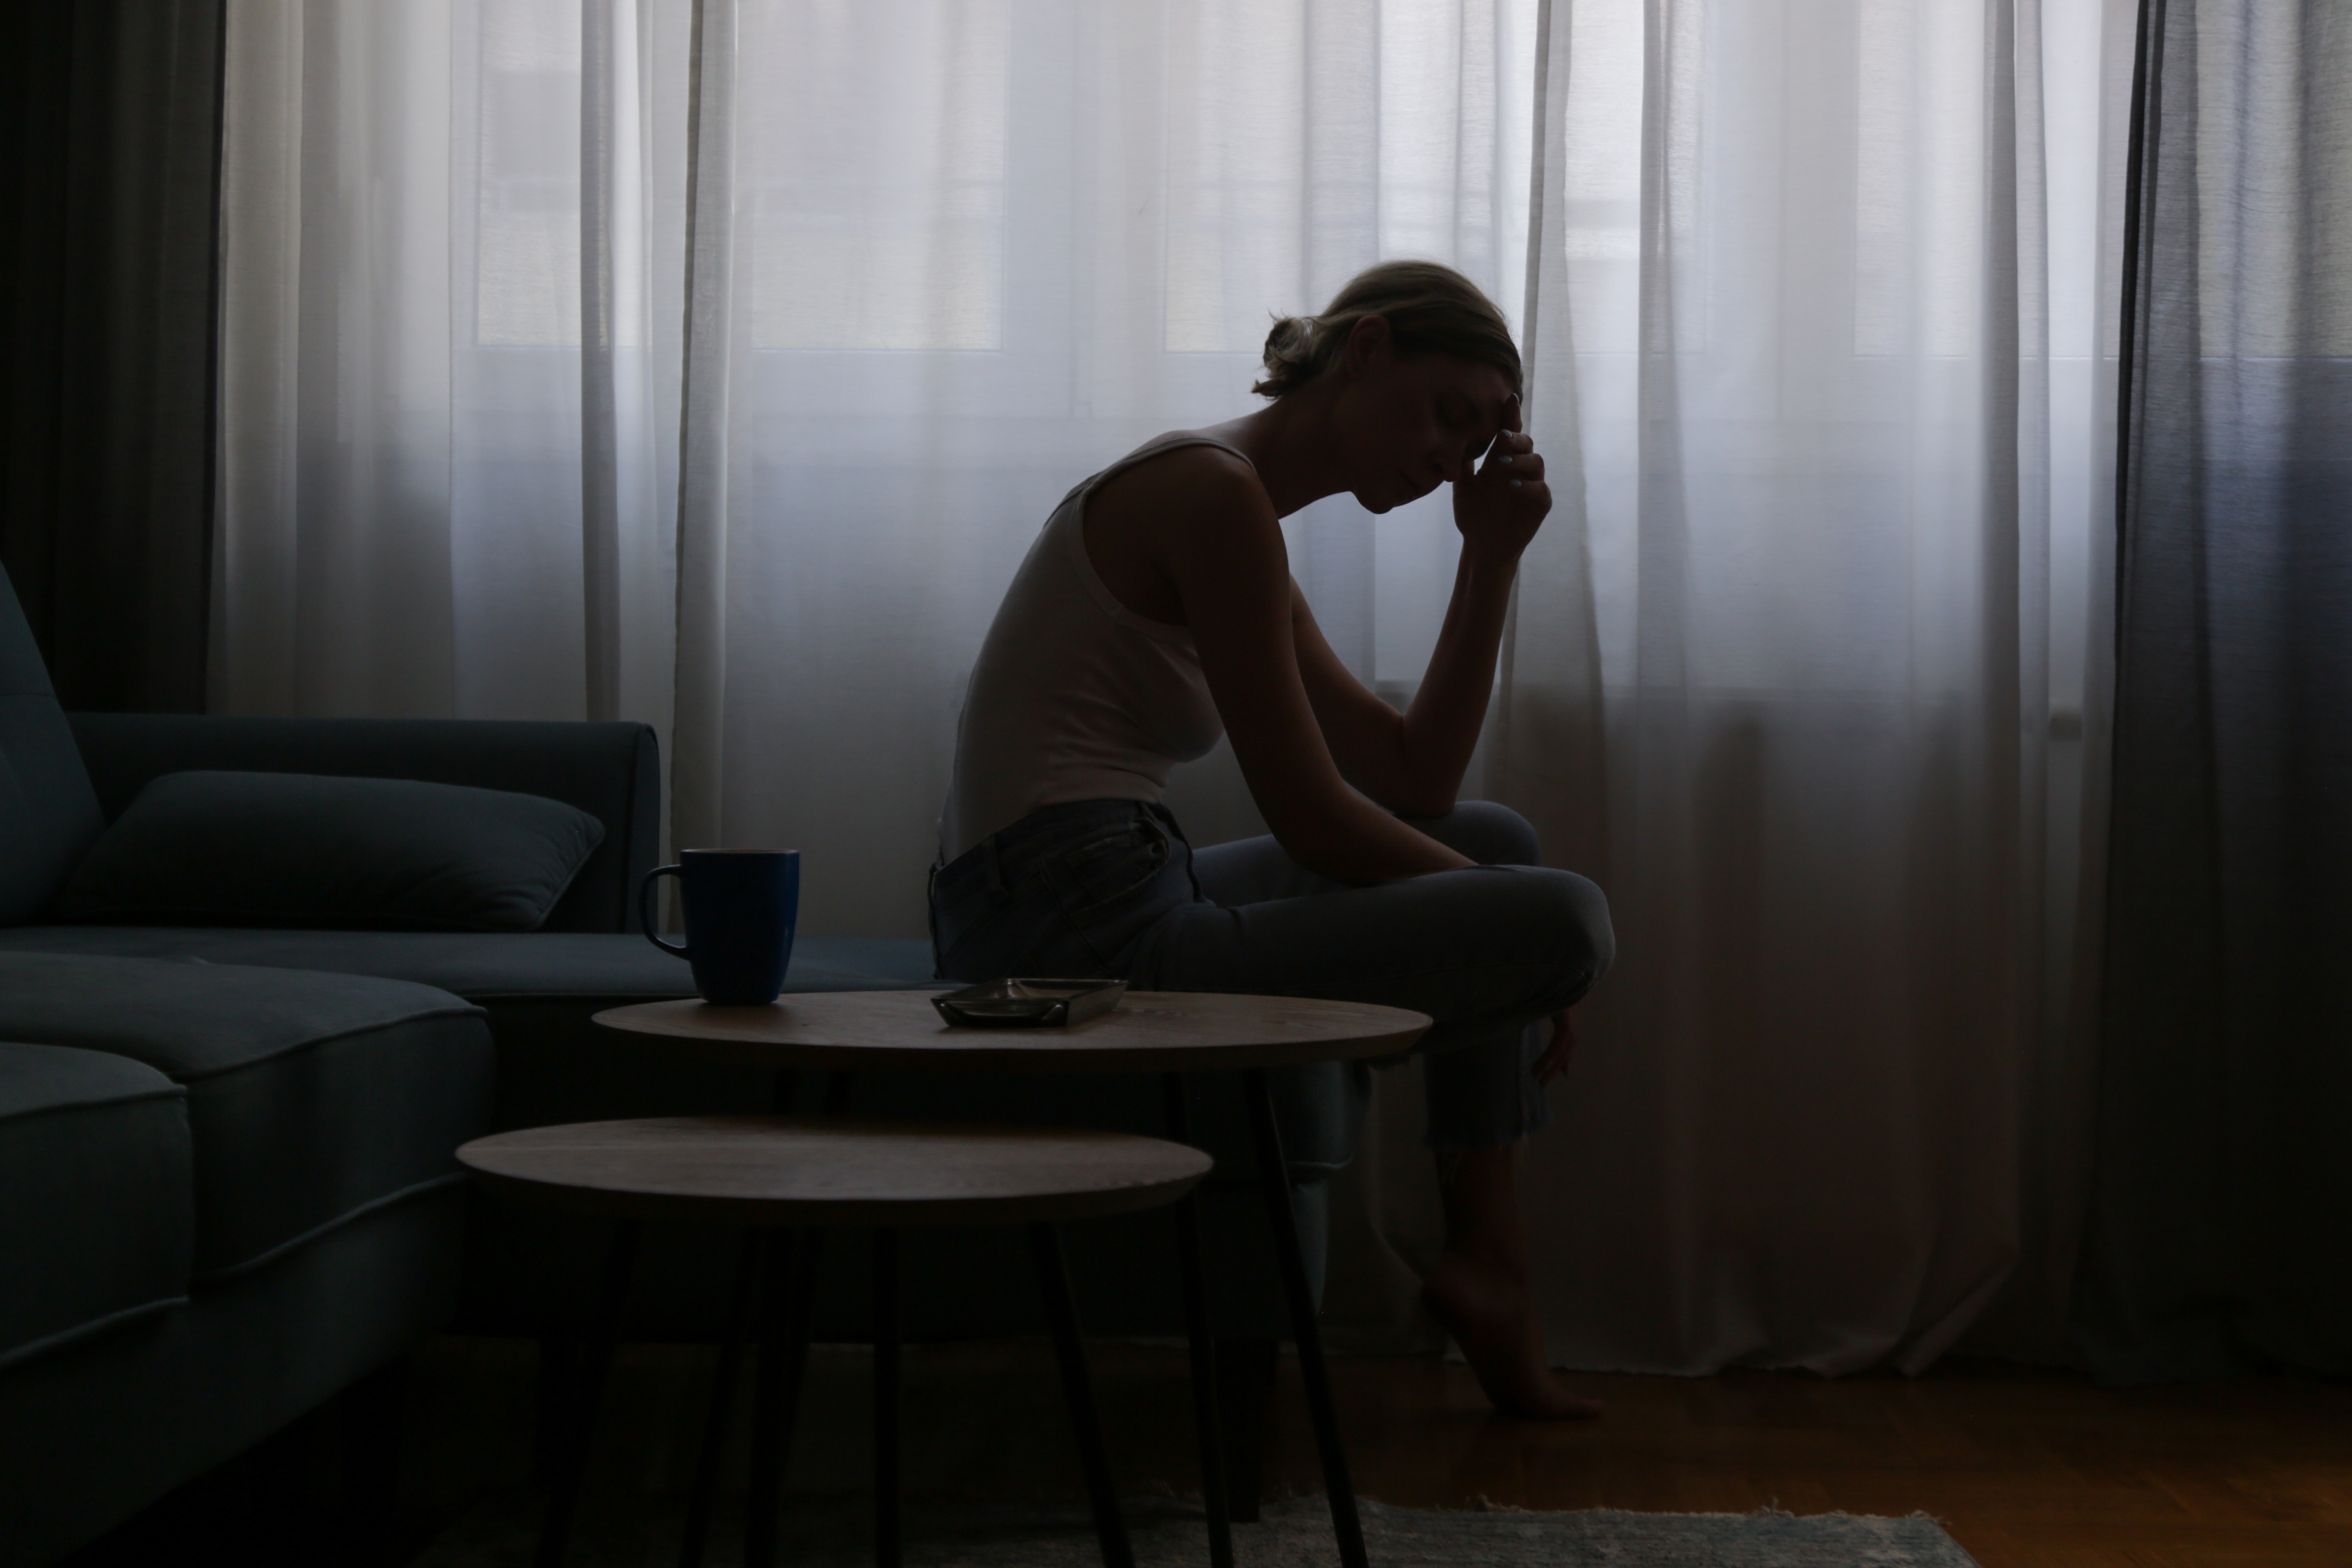 Depressed young woman sitting on a sofa next to a window | Source: Shutterstock